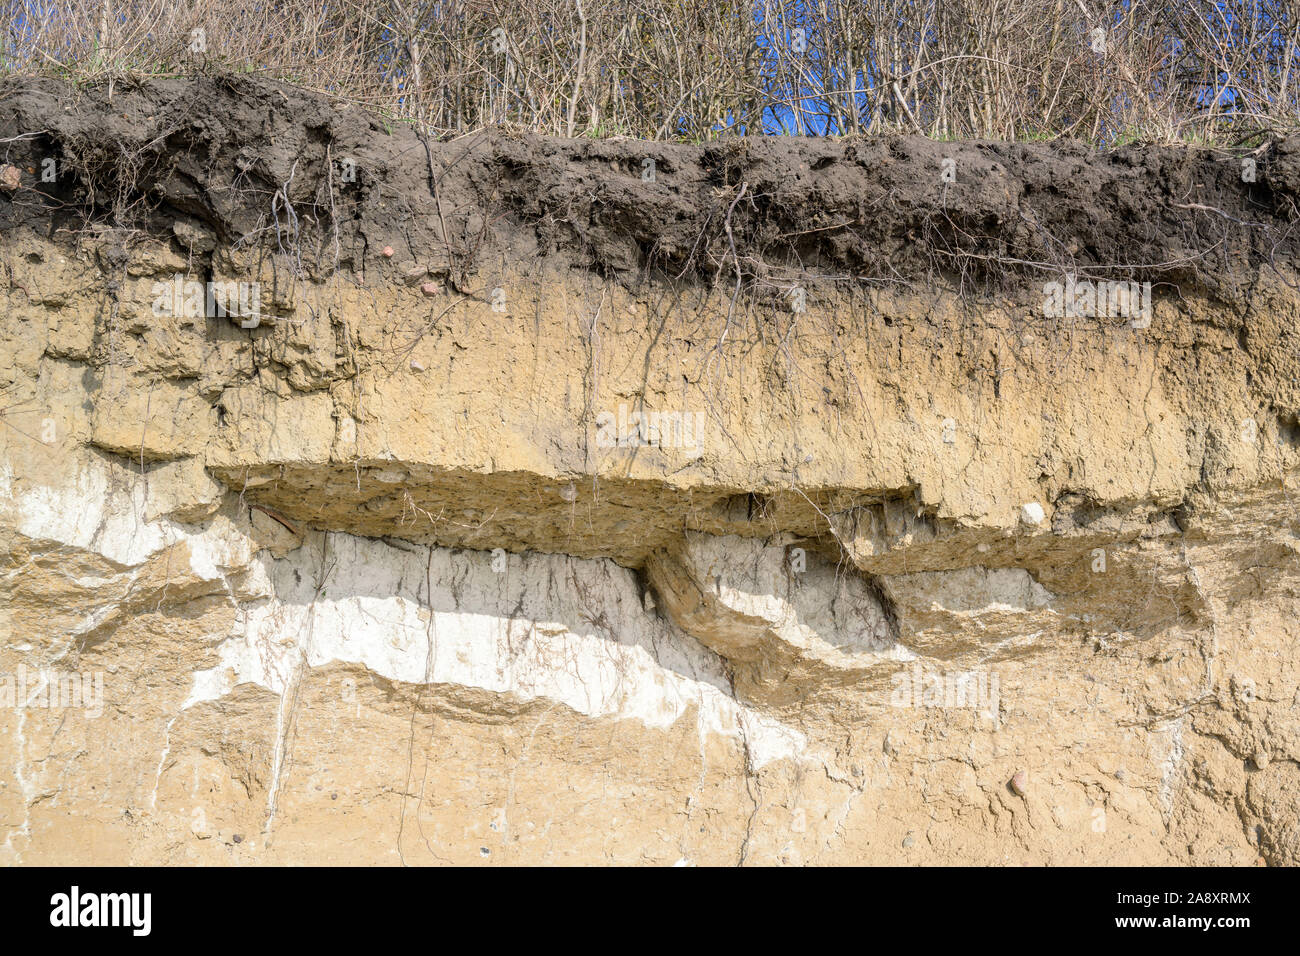 Soil layers at the edge of an eroded steep coast cliff with trees on top, on the German island Poel  near Wismar, Baltic Sea, copy space Stock Photo